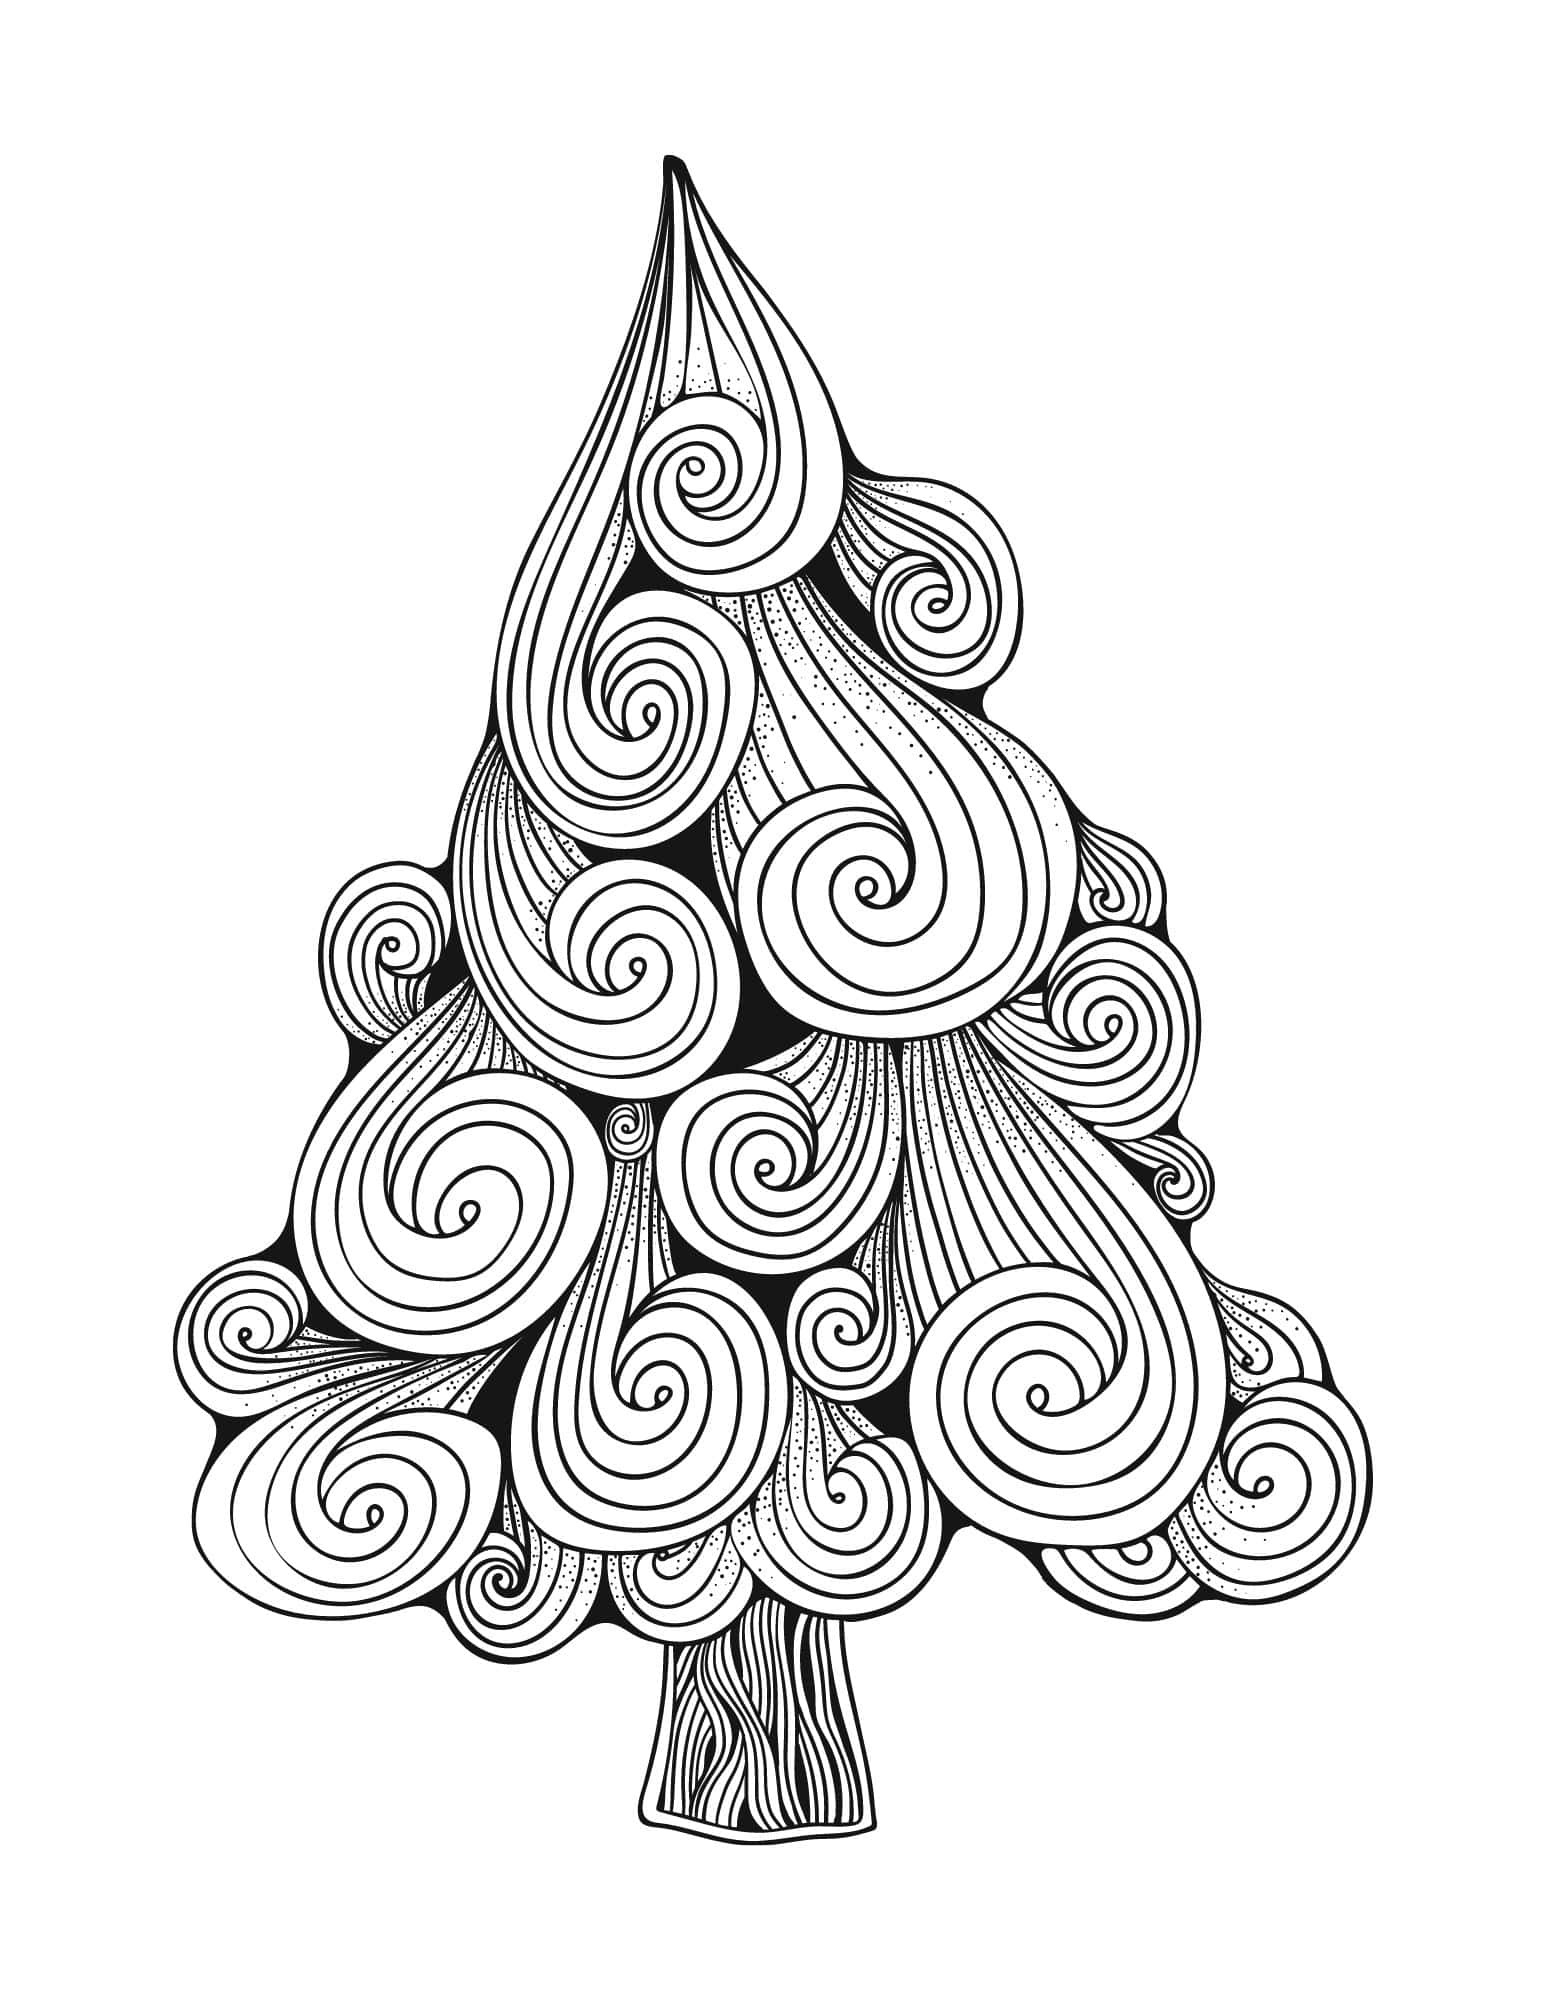 Joyful christmas tree coloring pages